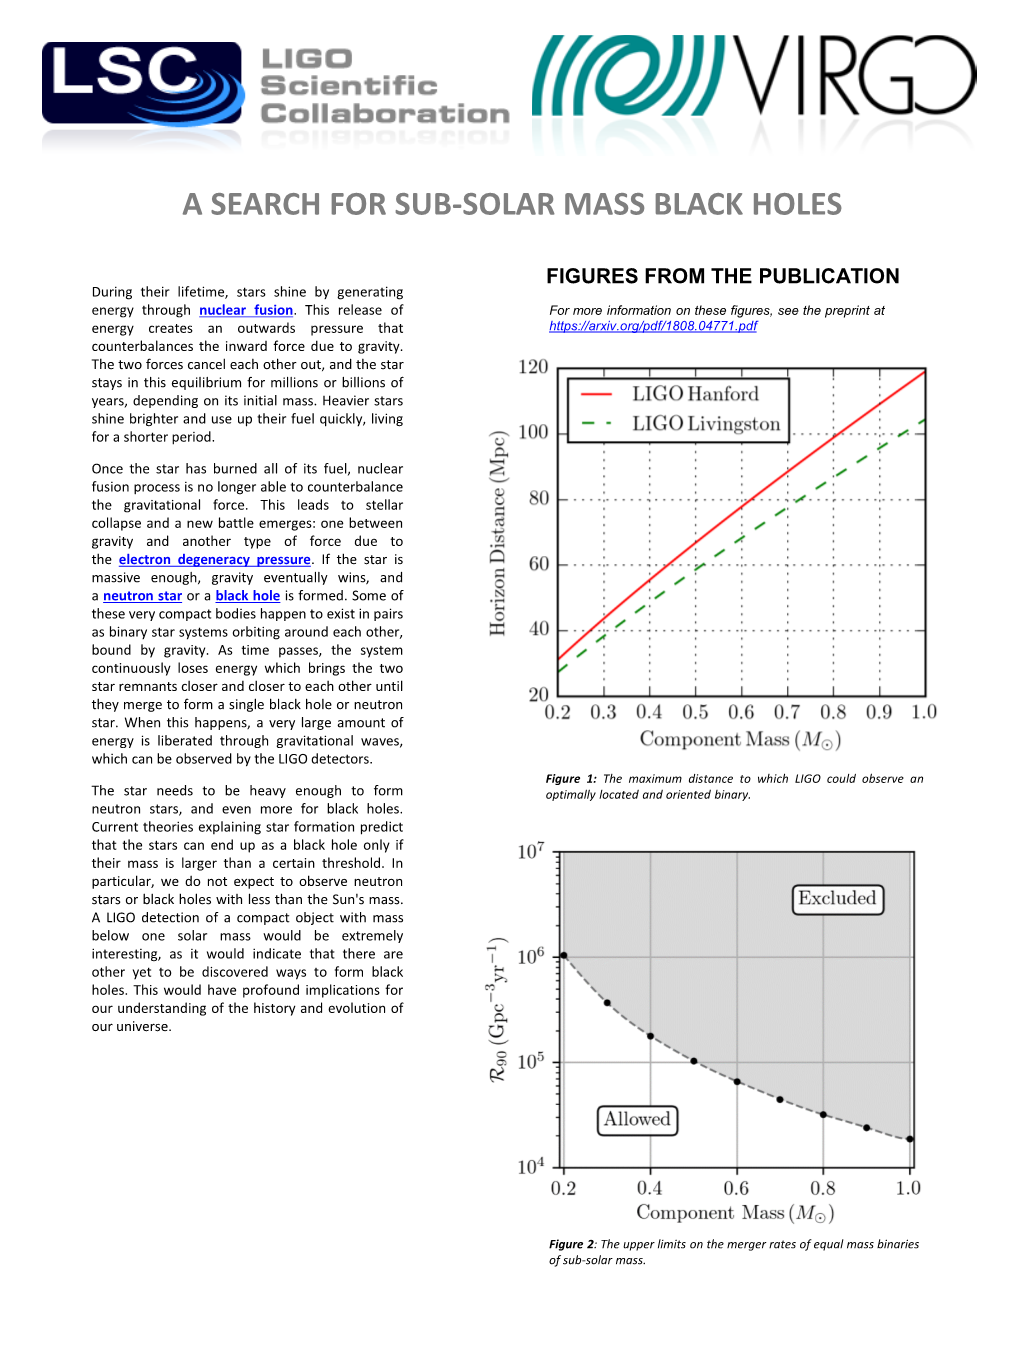 A Search for Sub-Solar Mass Black Holes